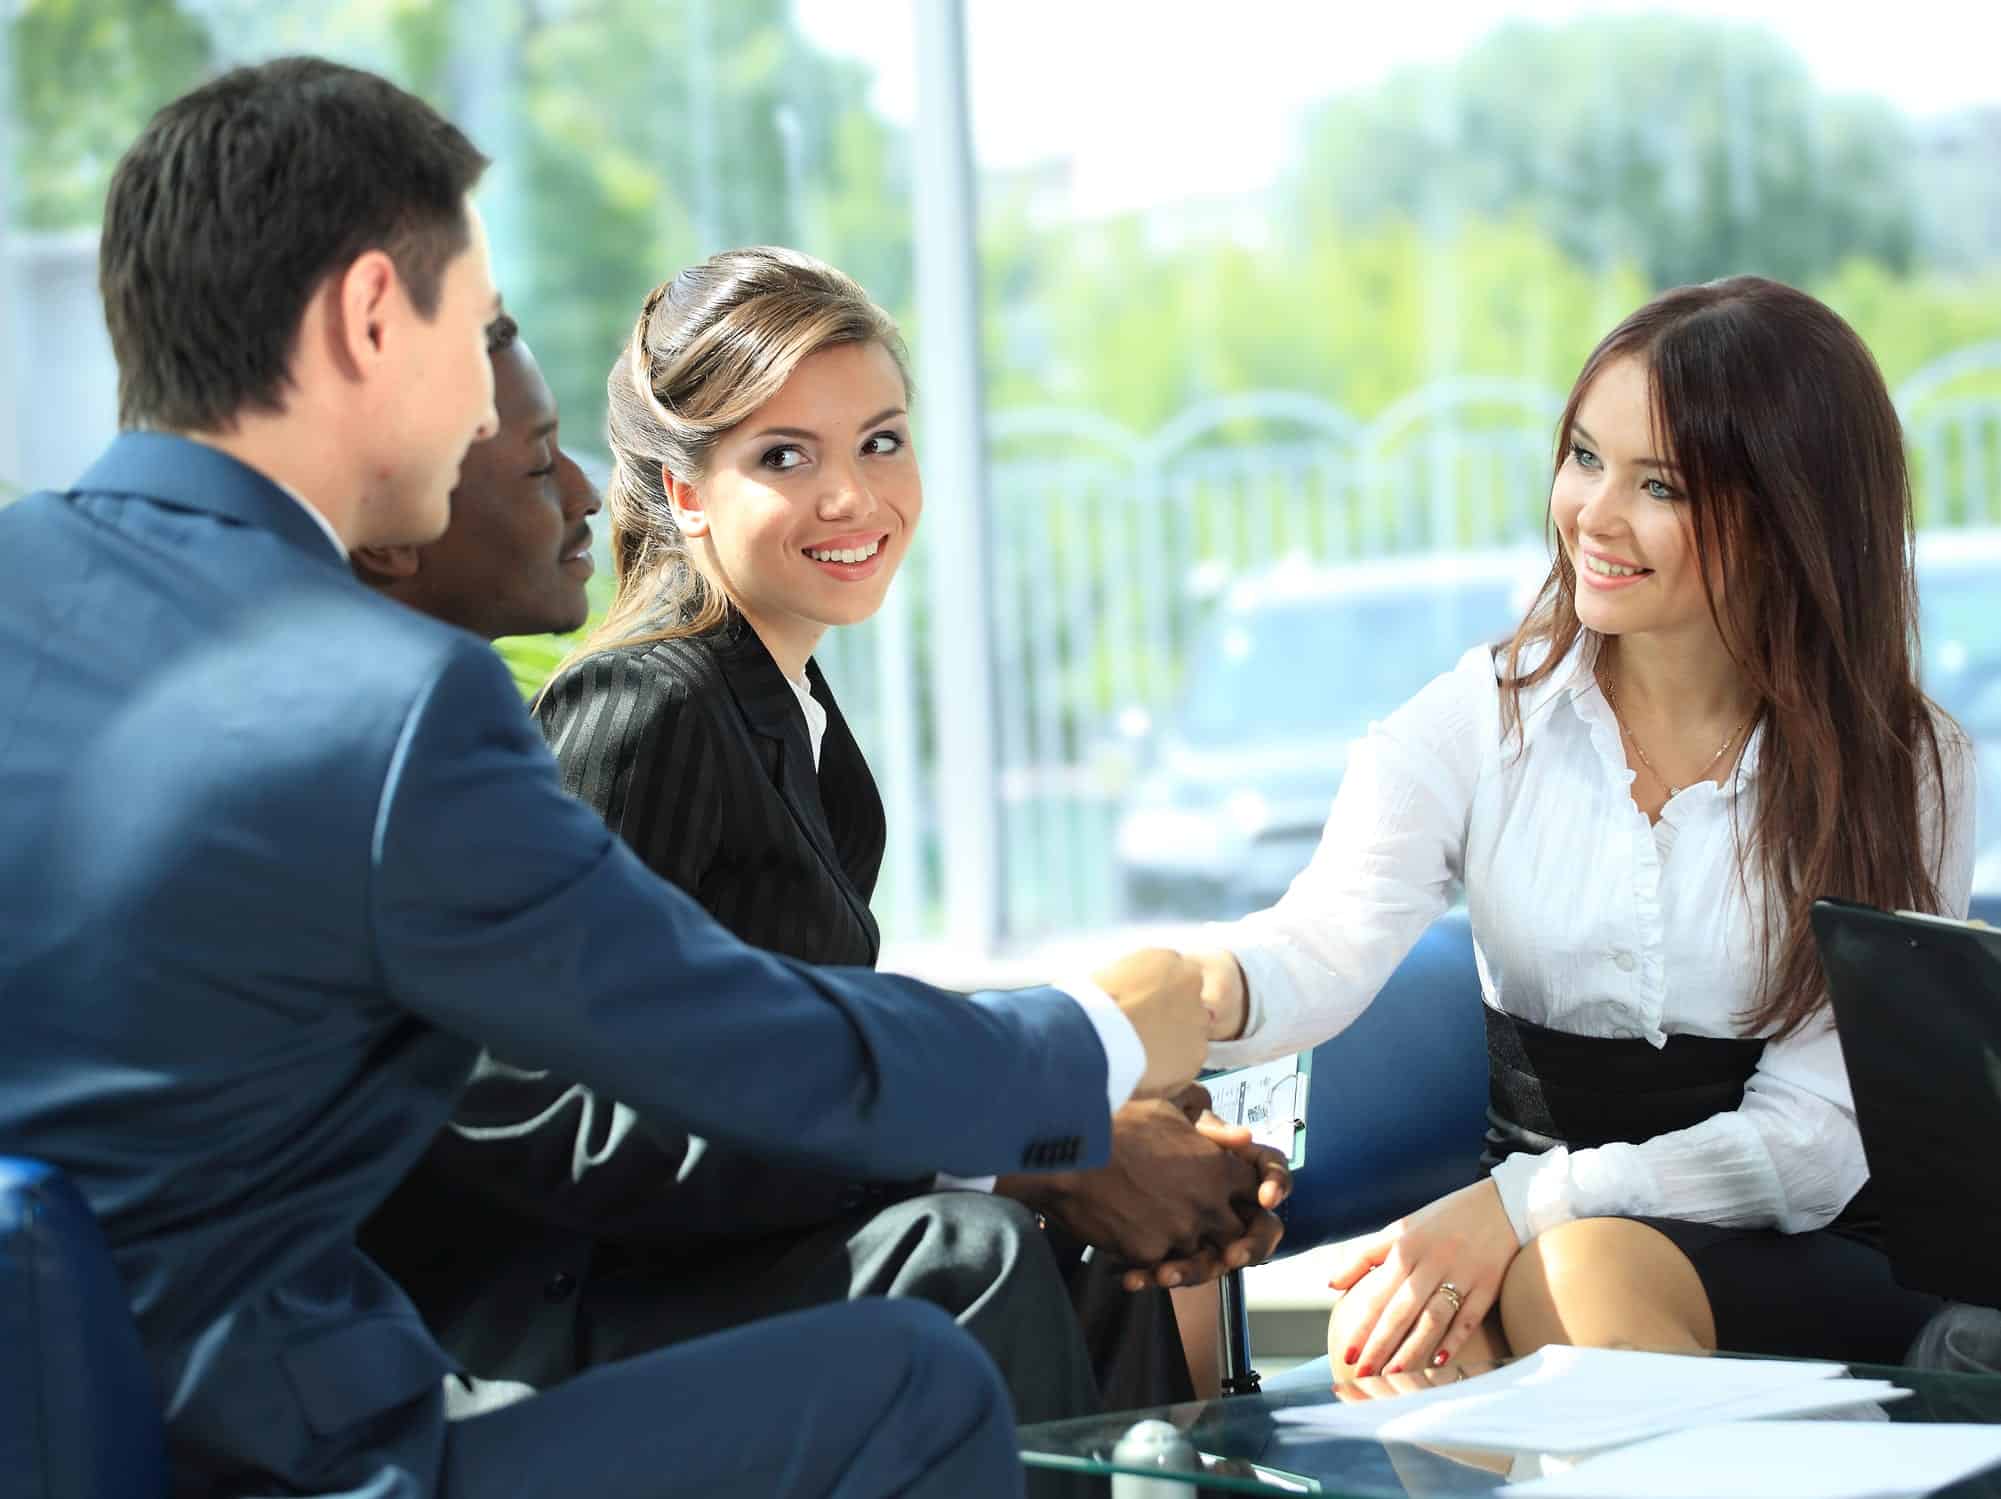 http://www.dreamstime.com/stock-photography-business-people-shaking-hands-image26373182